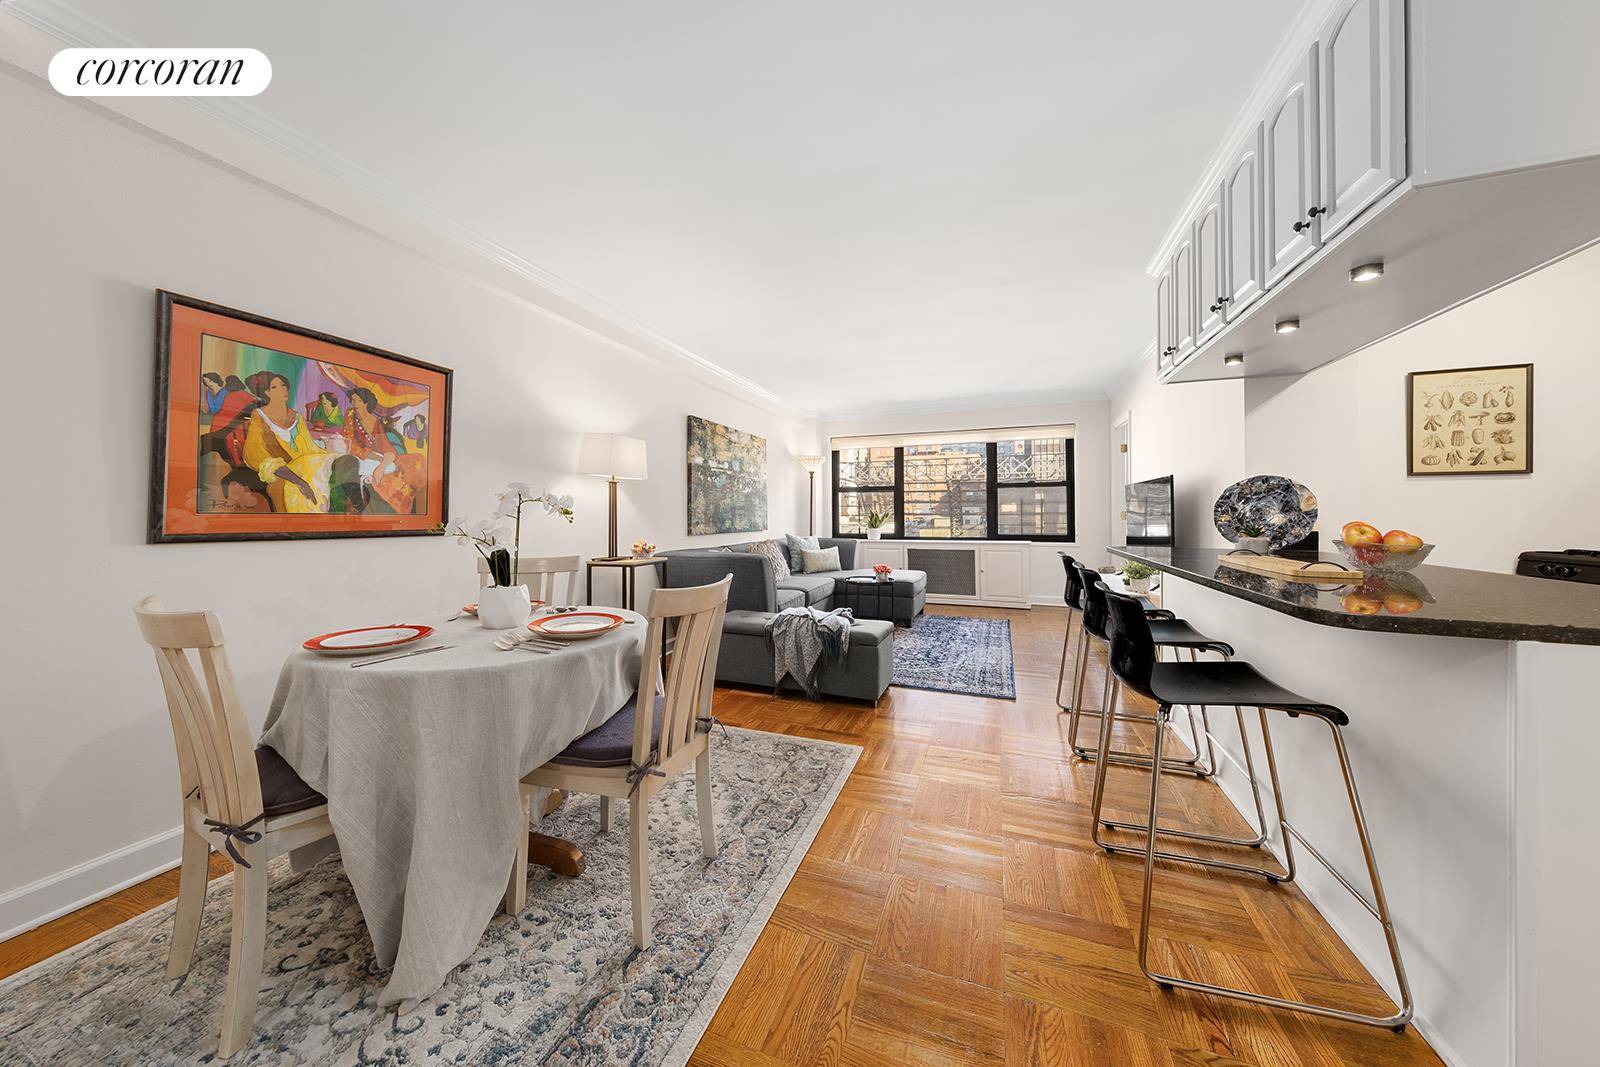 347 East 53rd street apt 8C is an oversized north facing QUIET junior 4 in the desirable Sutton Place neighborhood with low maintenance.